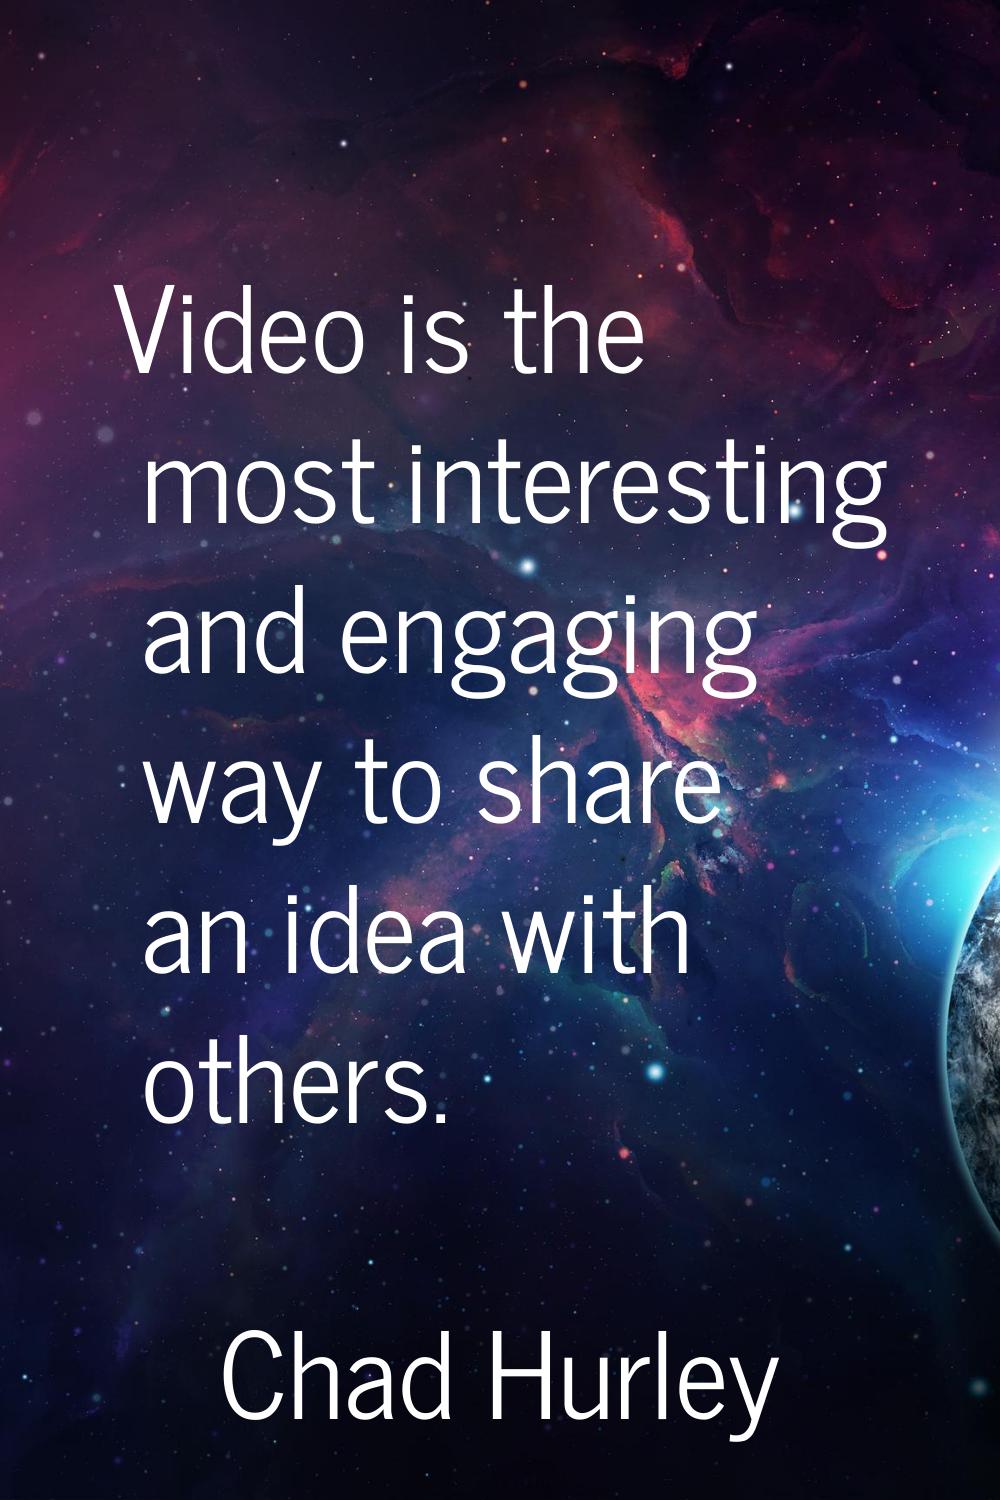 Video is the most interesting and engaging way to share an idea with others.